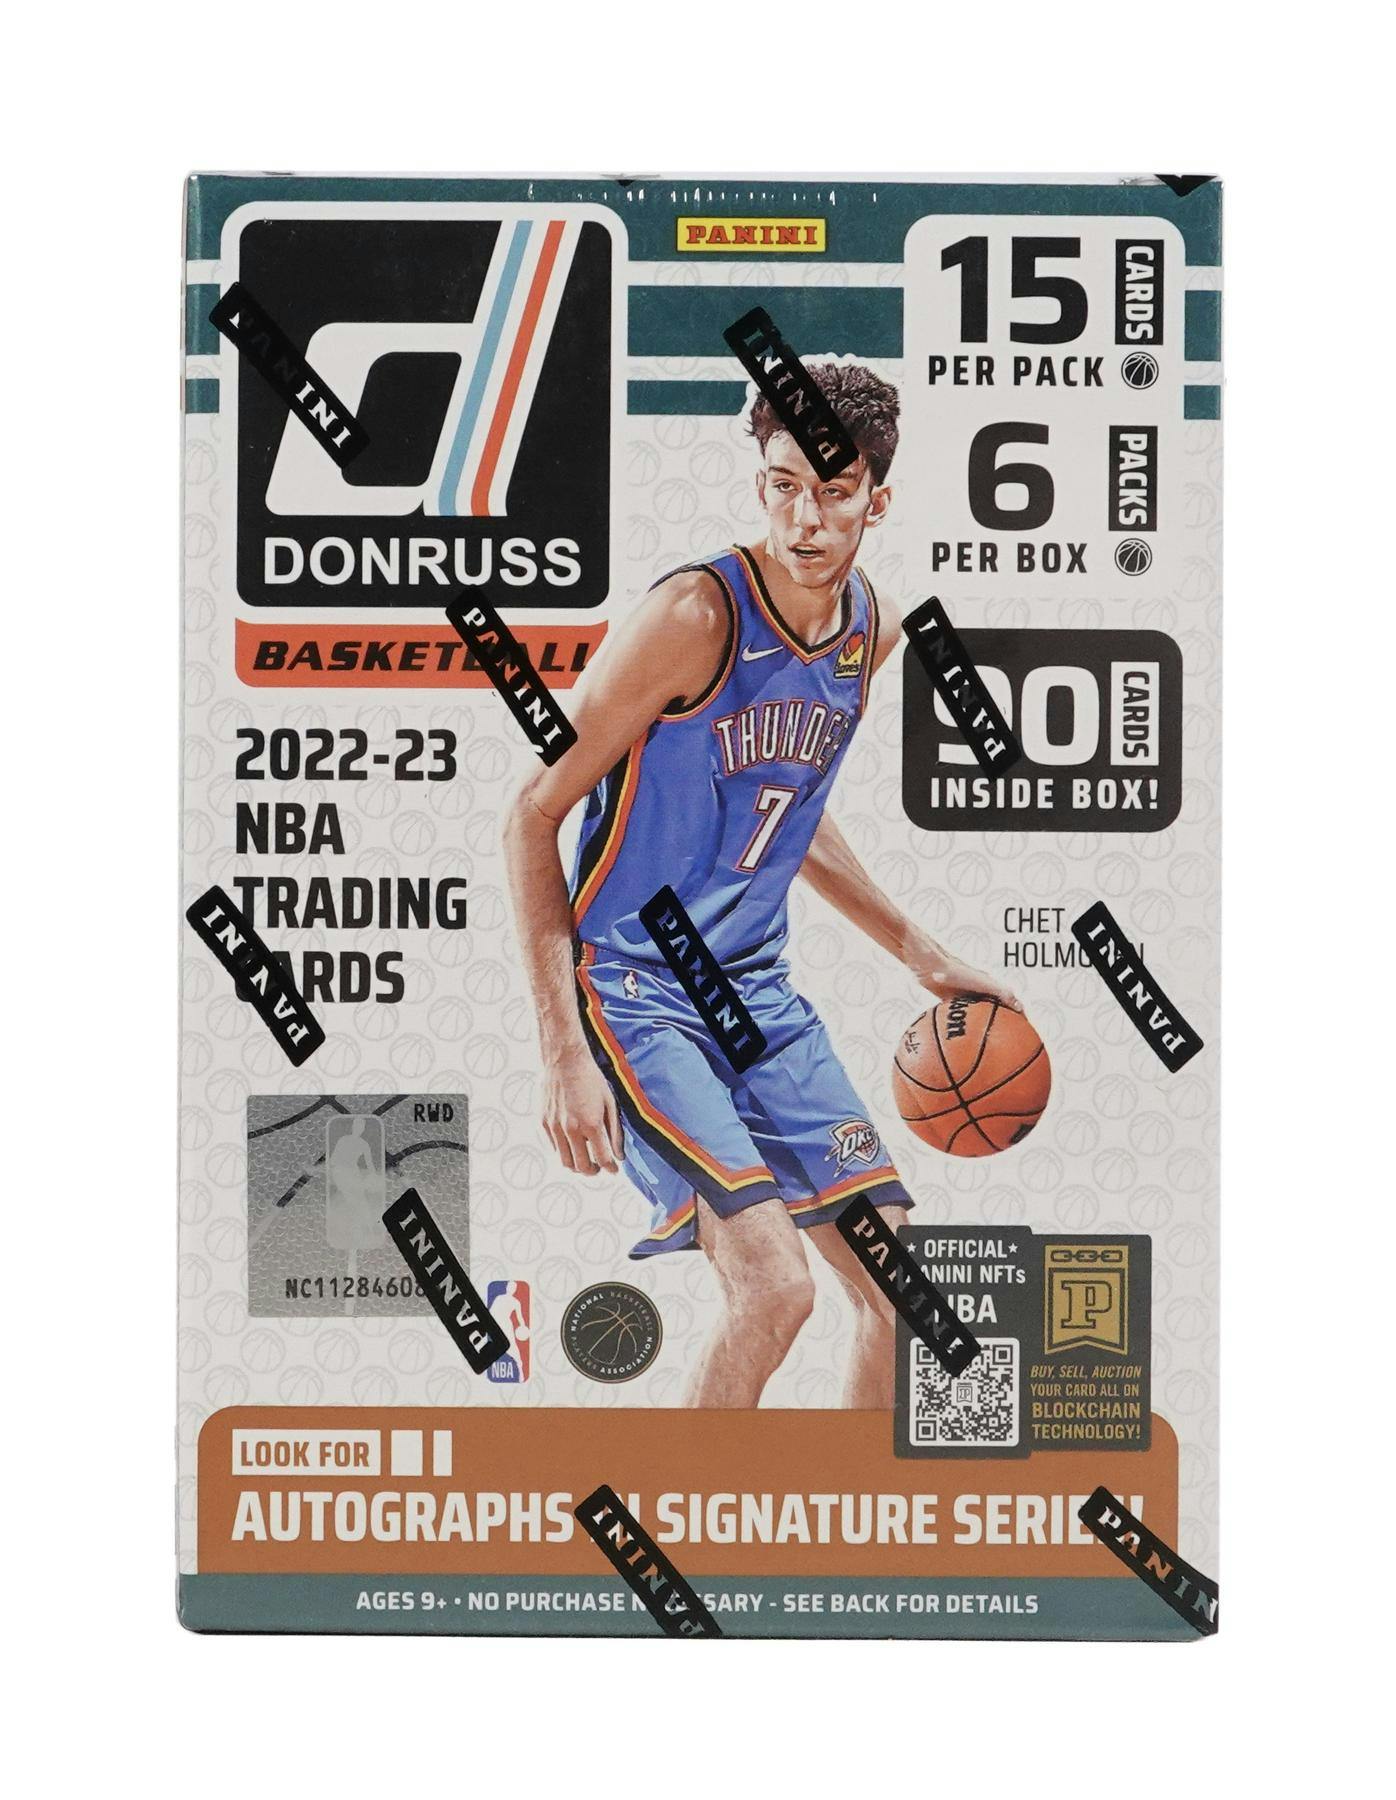 Top Dwyane Wade Rookie Autograph Cards List, Buying Guide, Analysis